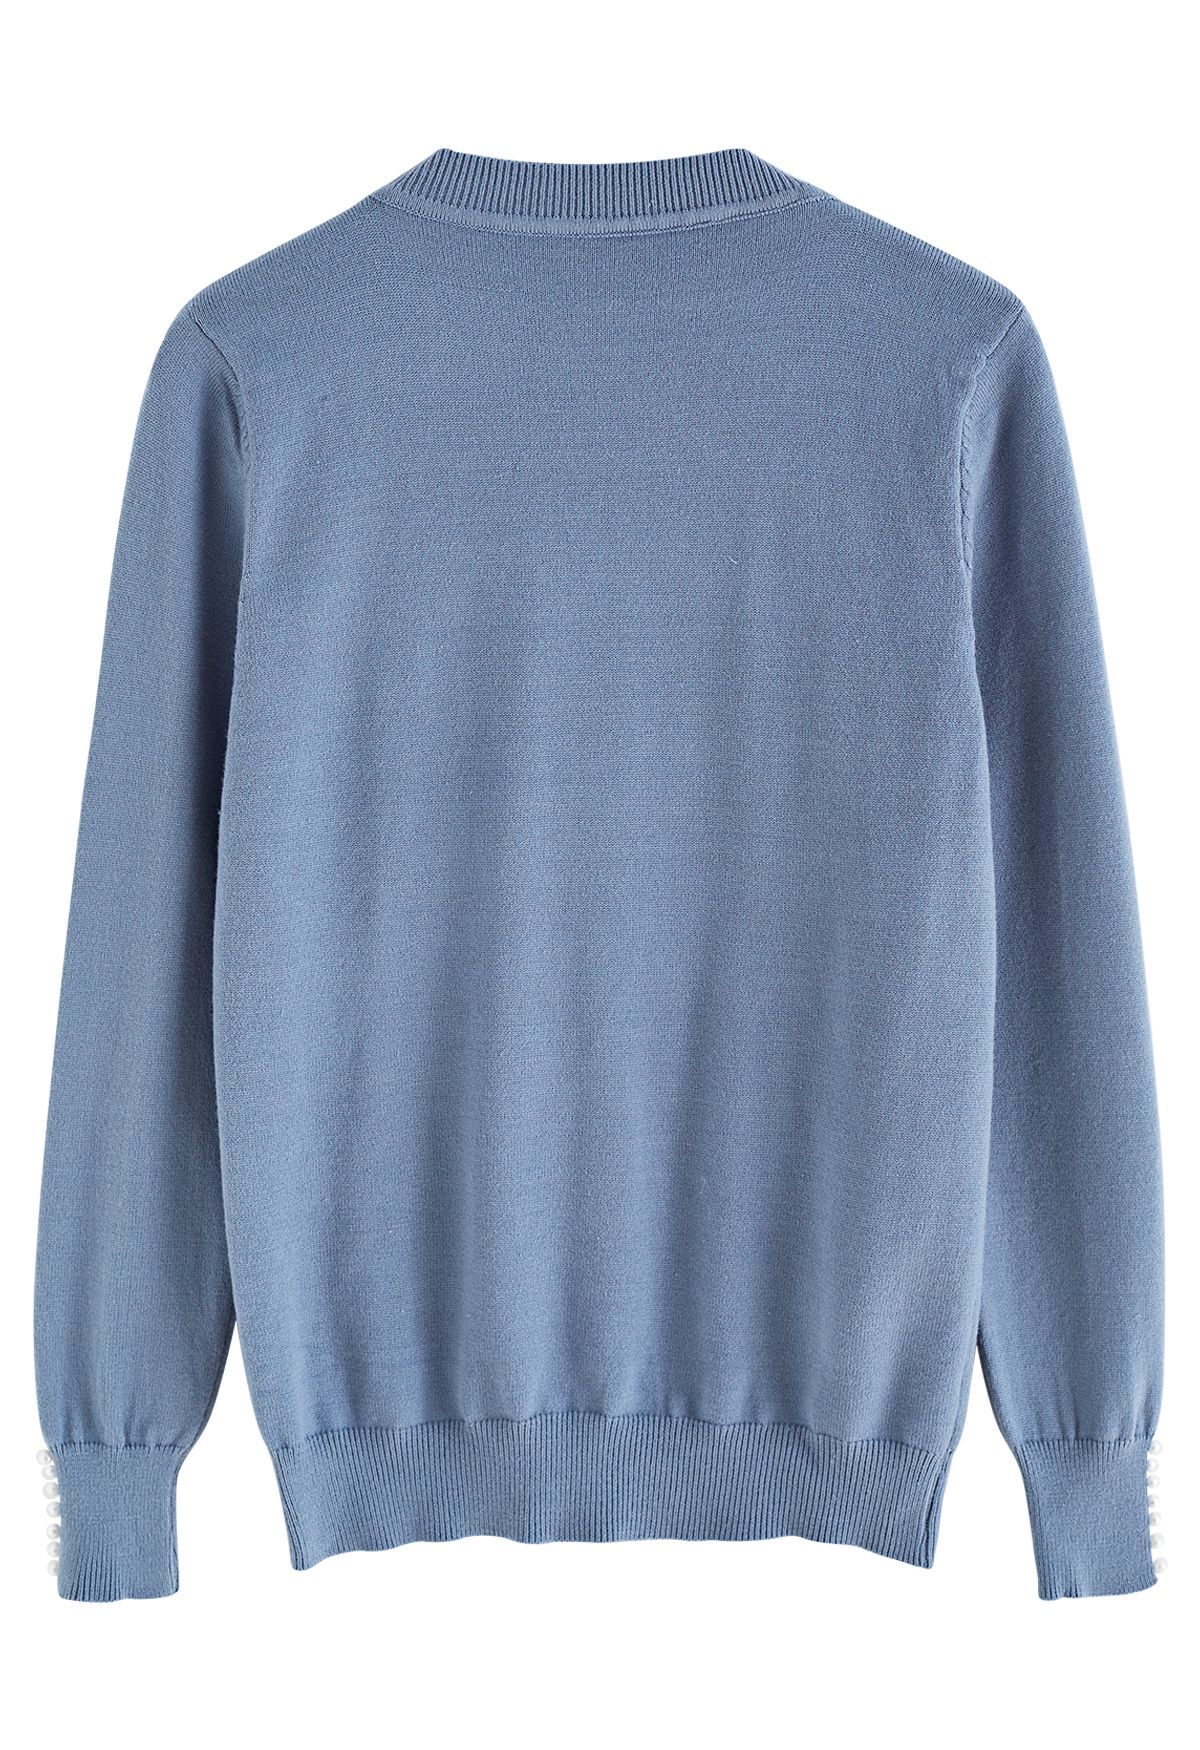 Pearl Trimmed Soft Knit Top in Dusty Blue